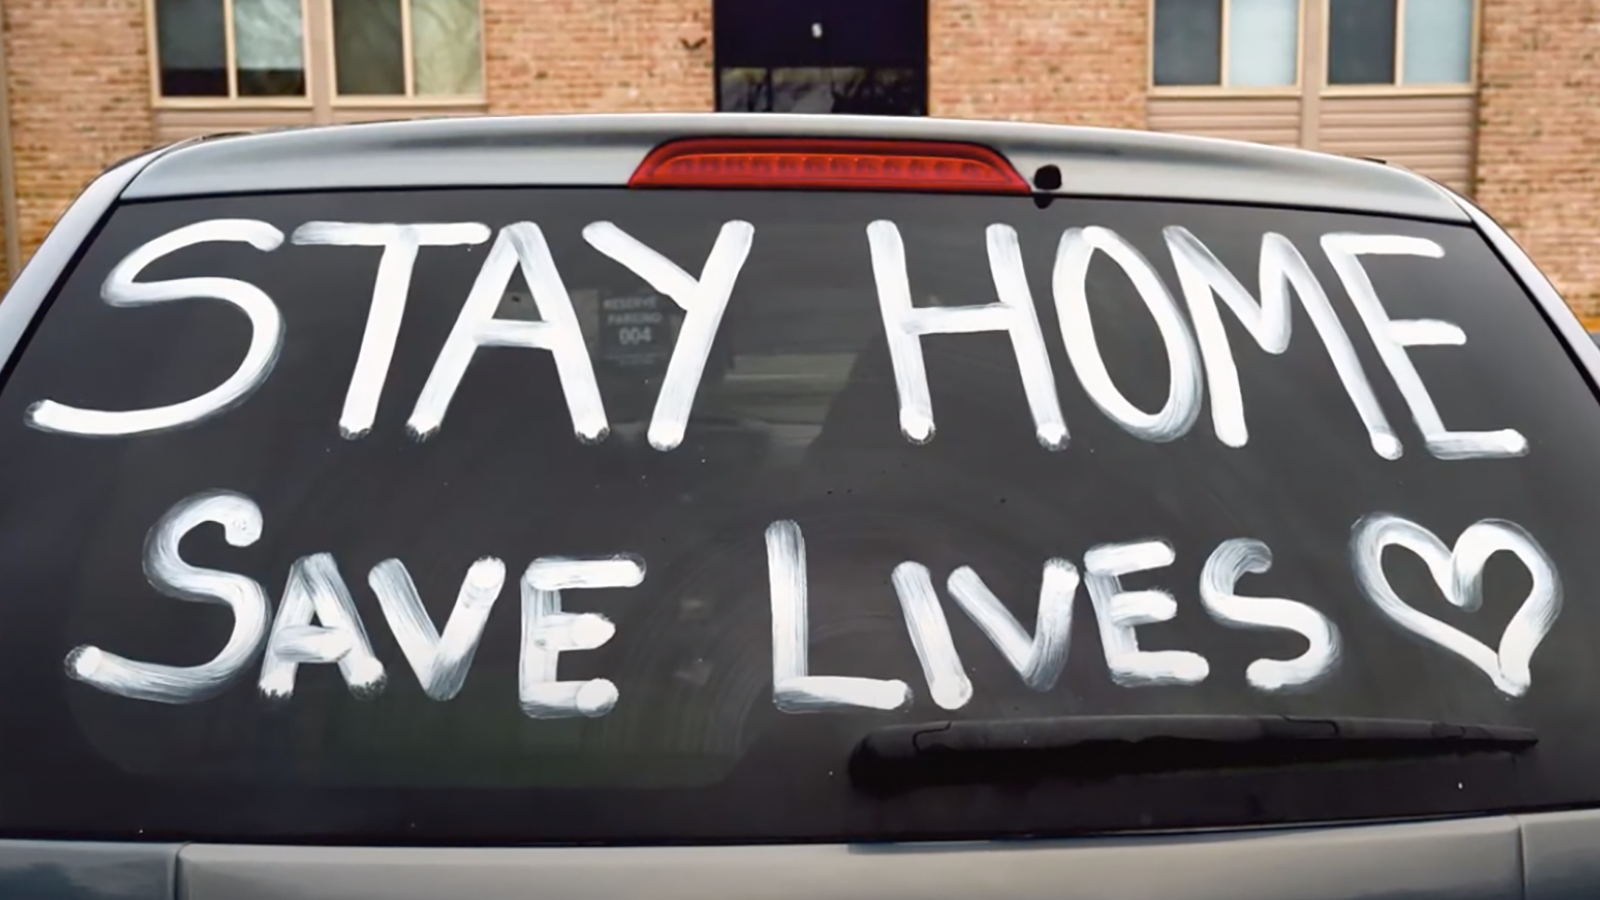 The text “Stay home, save lives” written on a windshield.